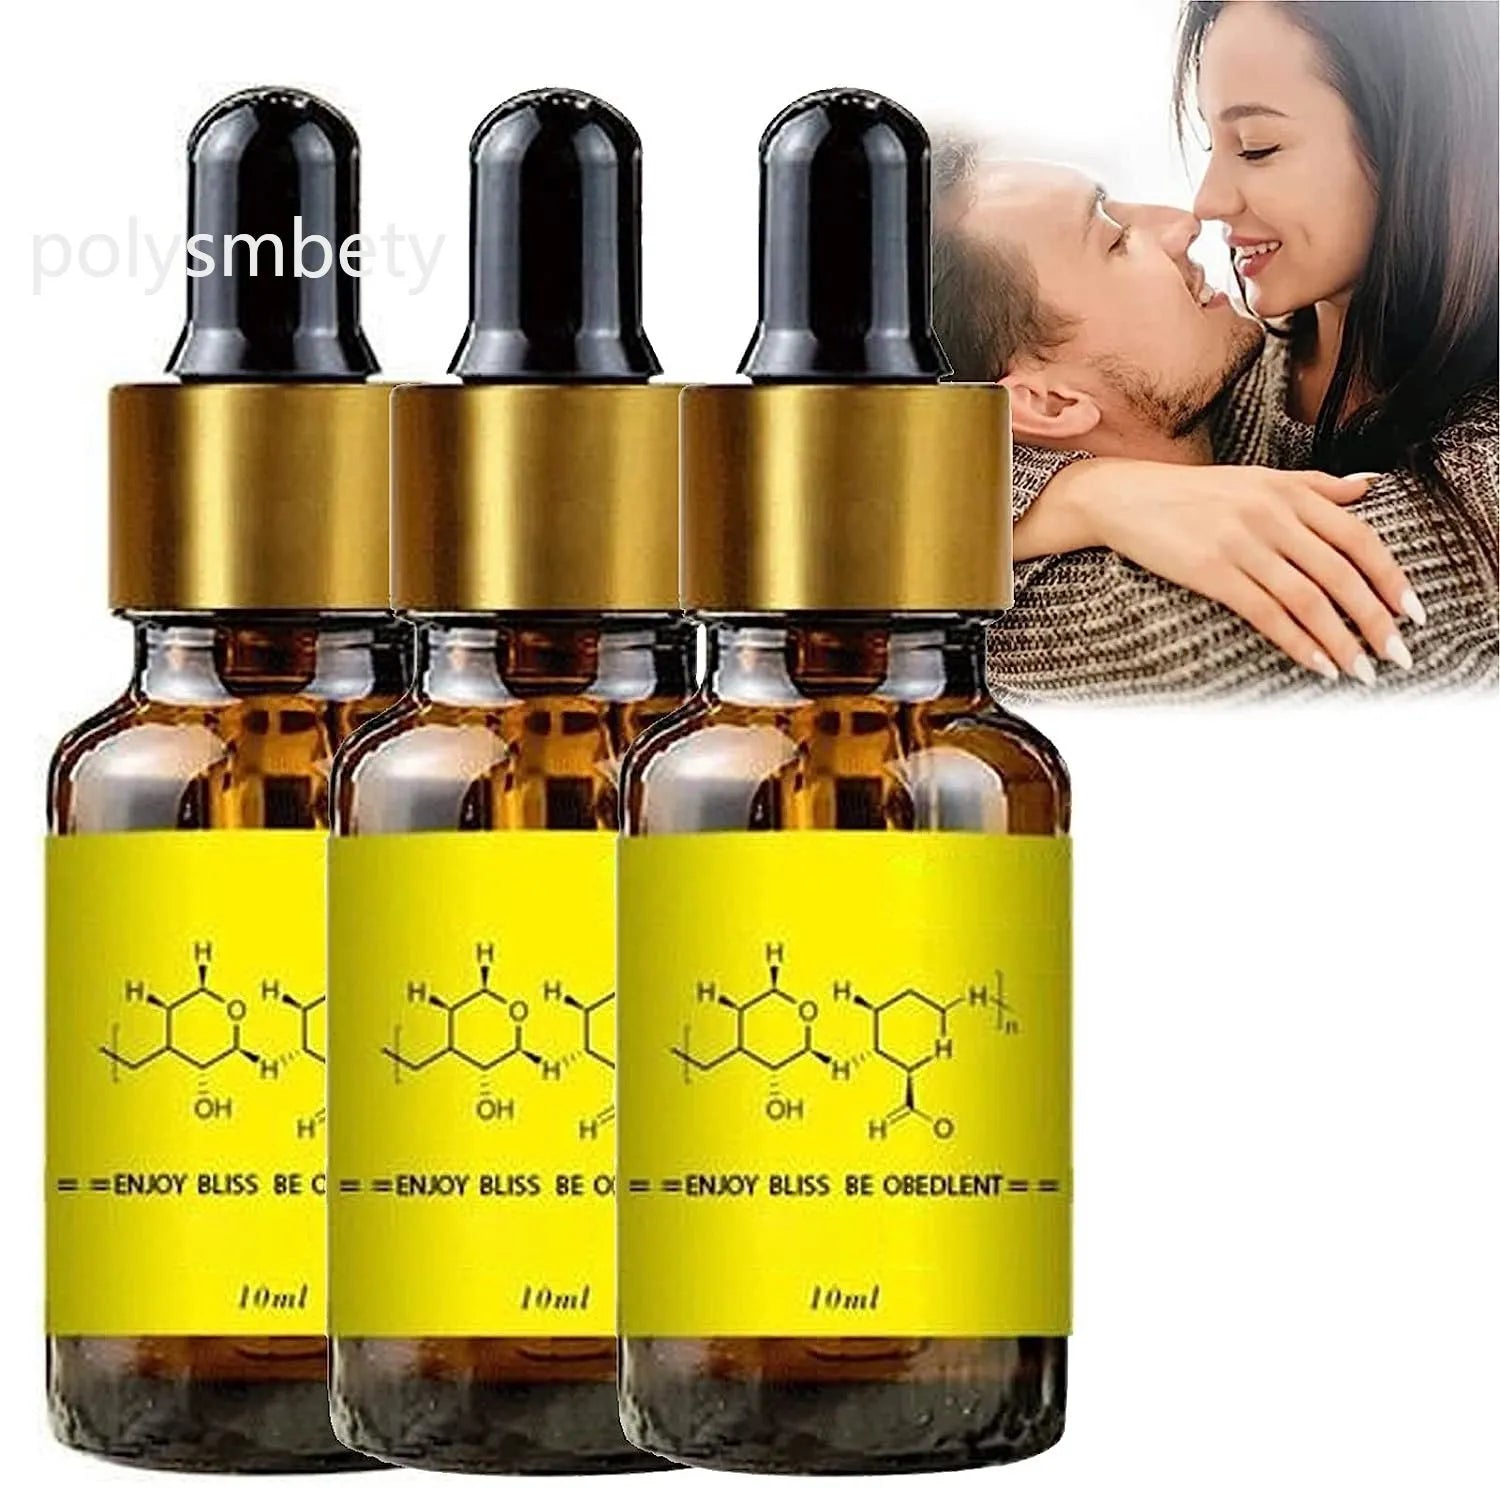 Flirting Perfume Pheromone For Man To Attract Women Long Lasting Androstenone Sexy Perfume Body Essential Sexually Stimulating - Sellinashop